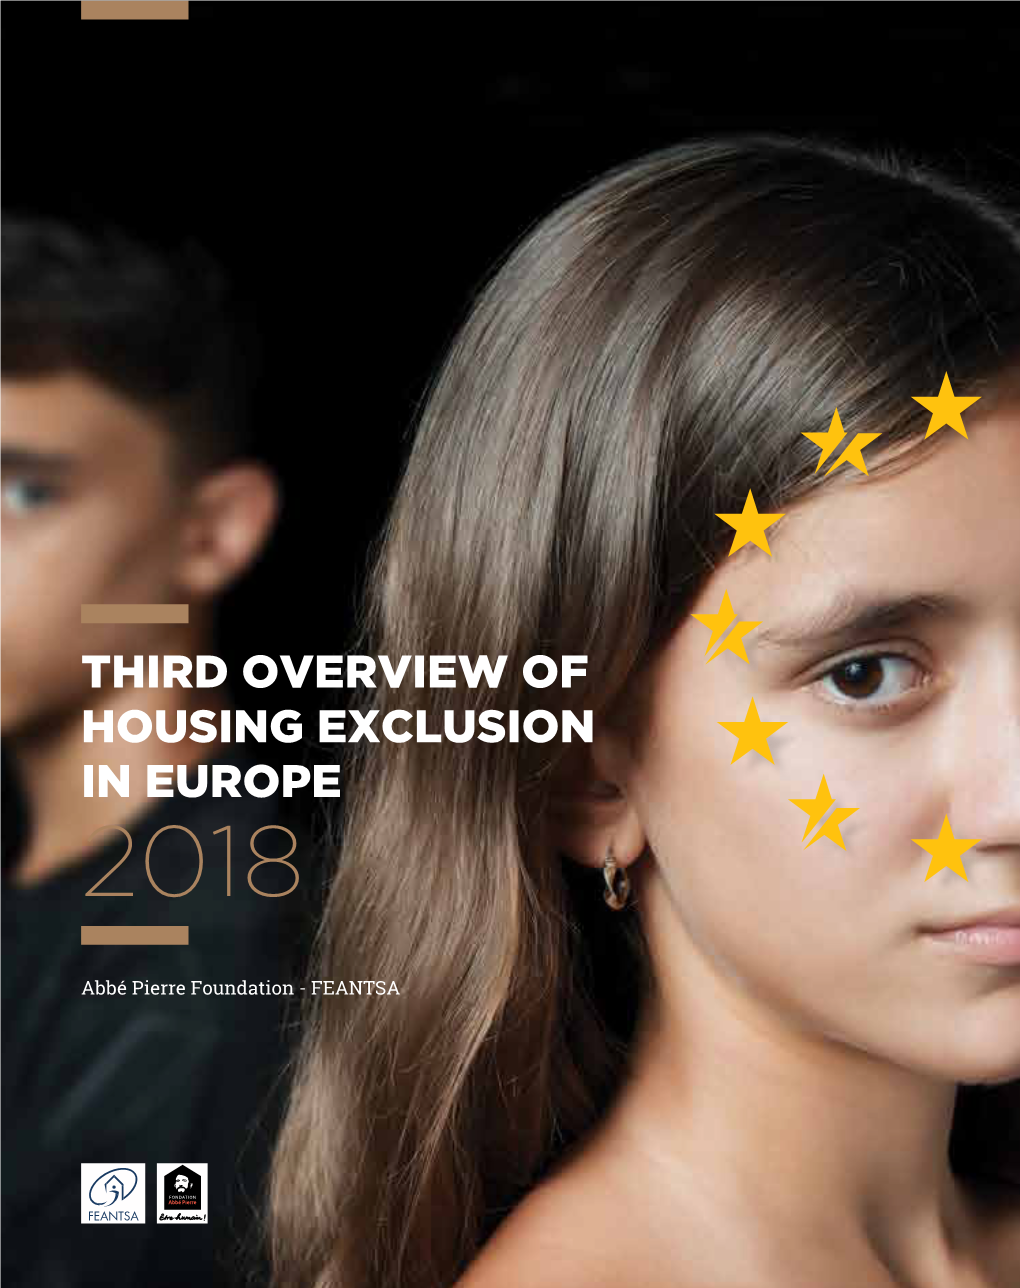 Third Overview of Housing Exclusion in Europe 2018